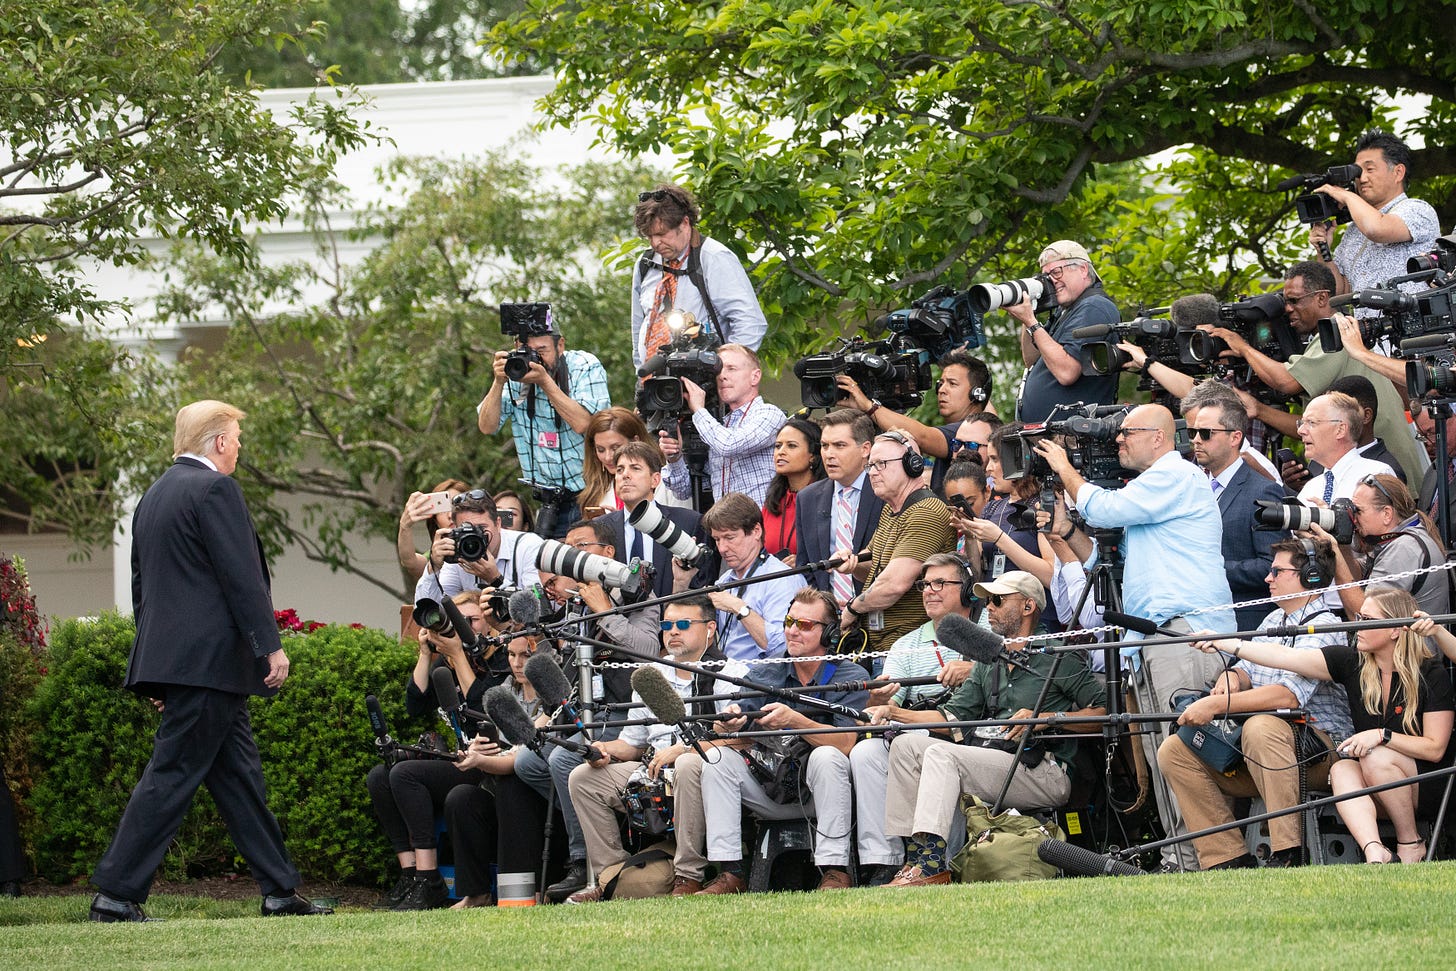 A photo of Donald Trump speaking to the dozens of members of the press on the South Lawn of the White House on May 20, 2019.